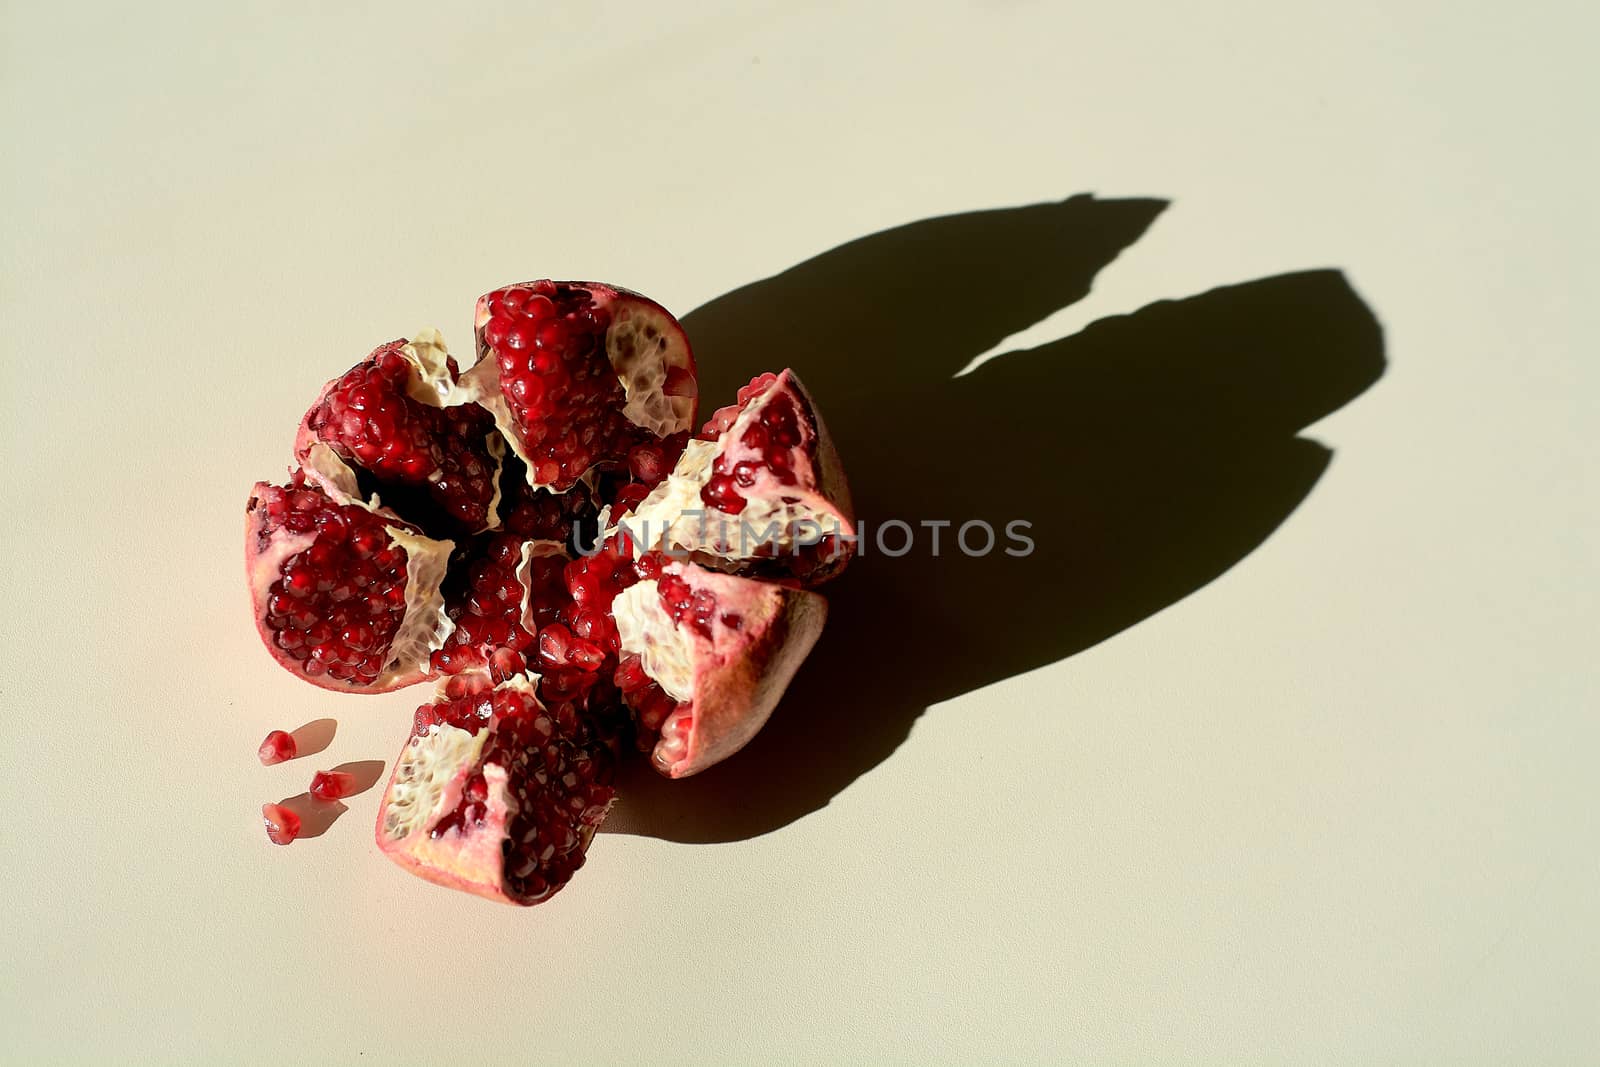 Garnet. Ripe red juicy pomegranate. Grains pomegranate fruit. Pomegranate cut in the form of a star. Lonely fruit on a light background. Hard daylight.